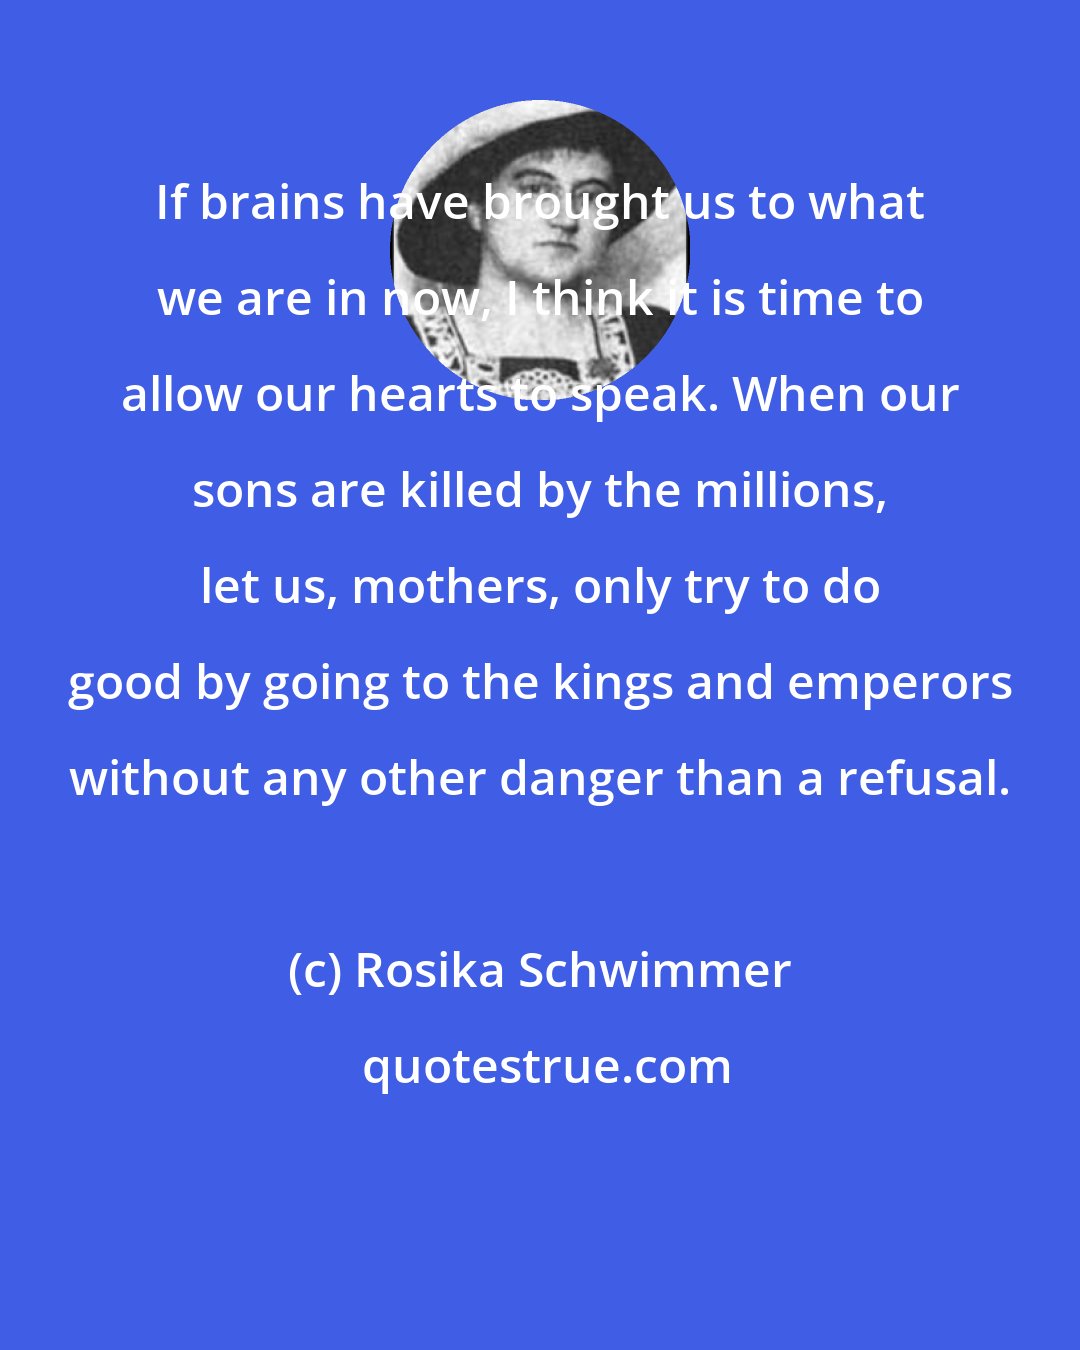 Rosika Schwimmer: If brains have brought us to what we are in now, I think it is time to allow our hearts to speak. When our sons are killed by the millions, let us, mothers, only try to do good by going to the kings and emperors without any other danger than a refusal.